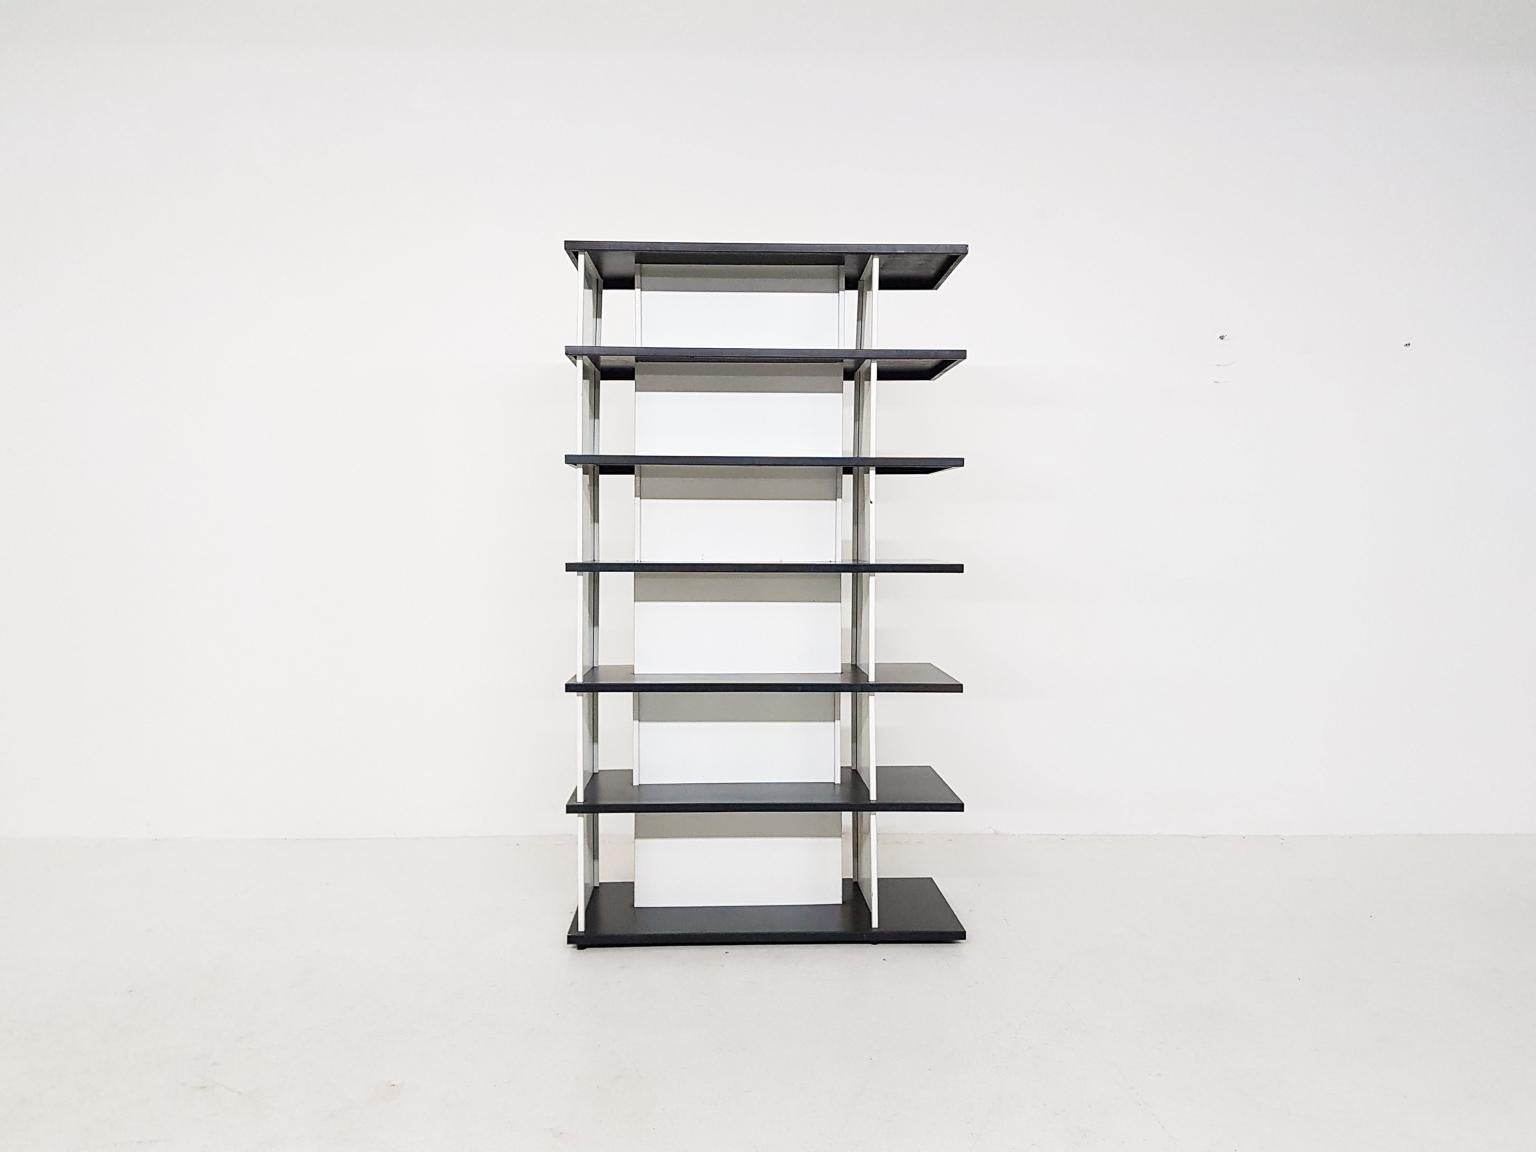 Mid-20th Century Gerrit Rietveld inspired Room Divider or Bookcase by Wim Rietveld, Dutch, 1960s For Sale